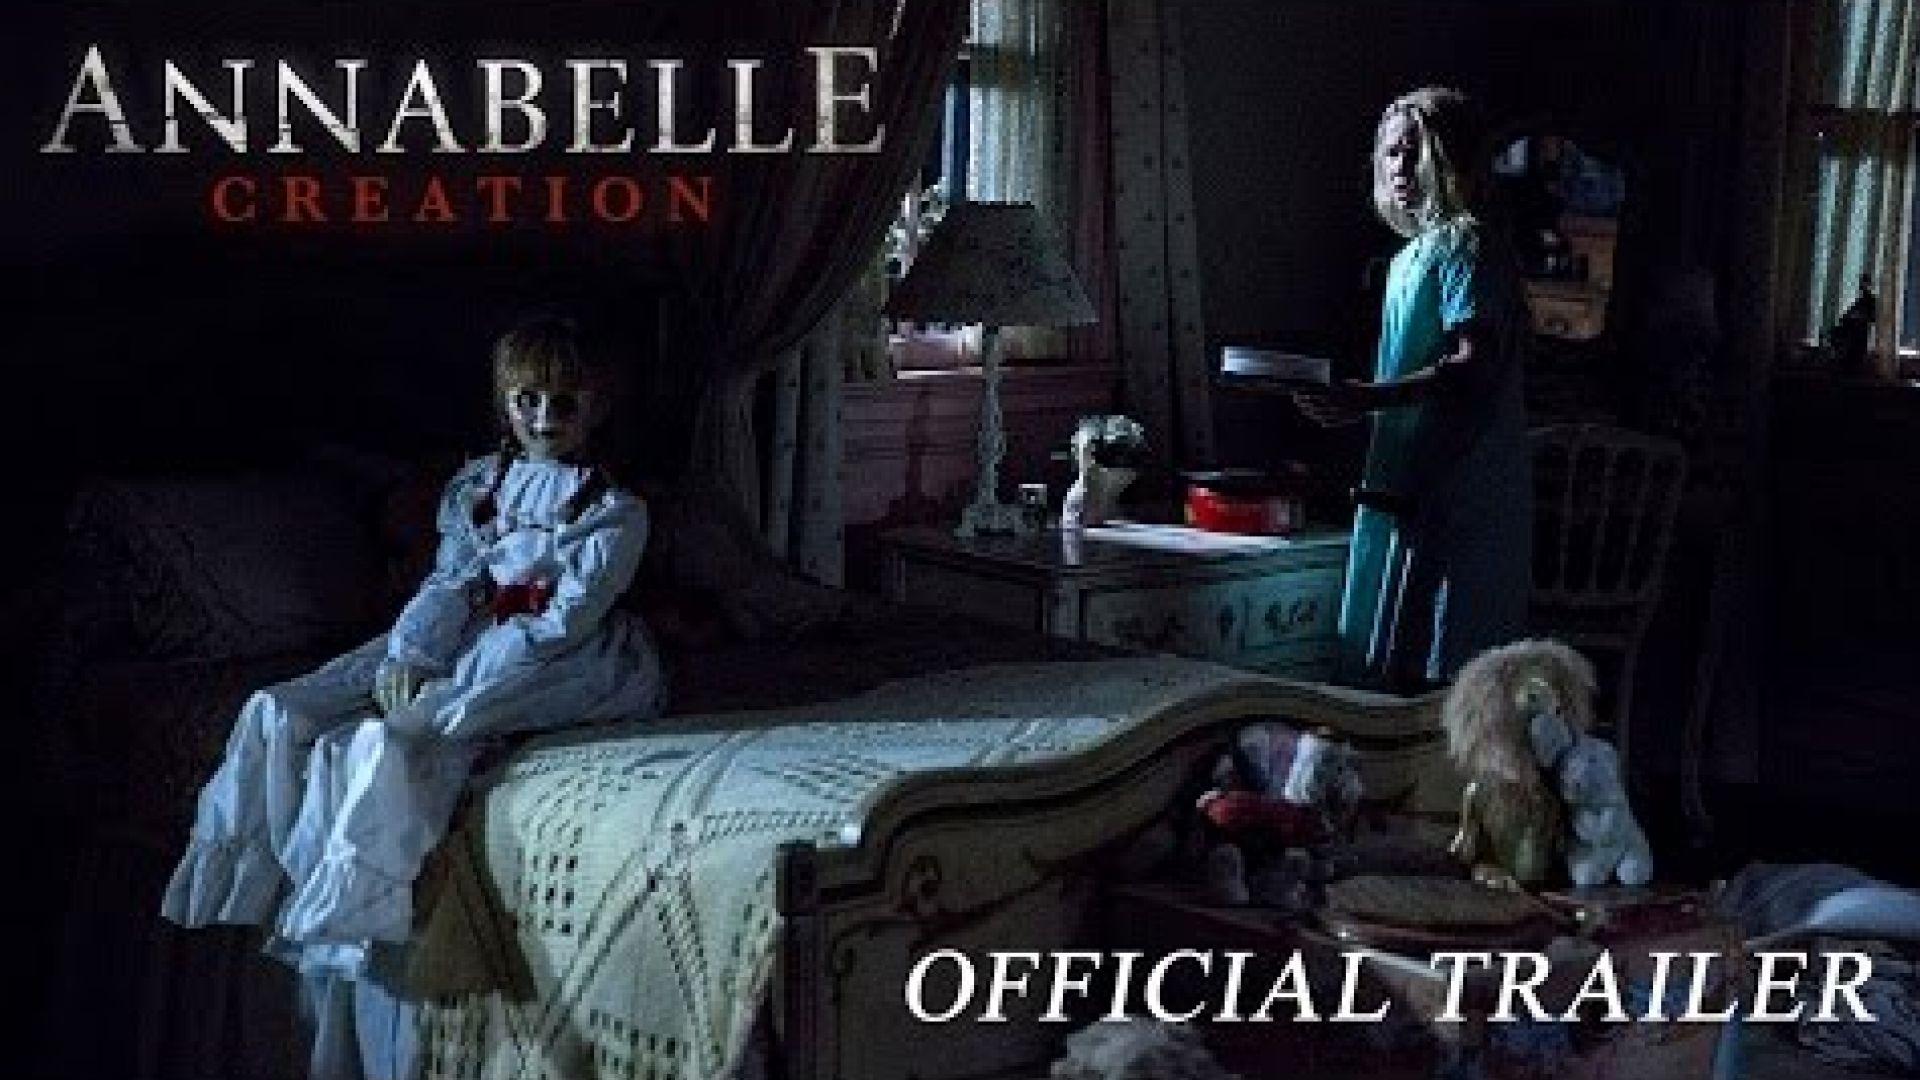 Official trailer for Annabelle: Creation, from the director 